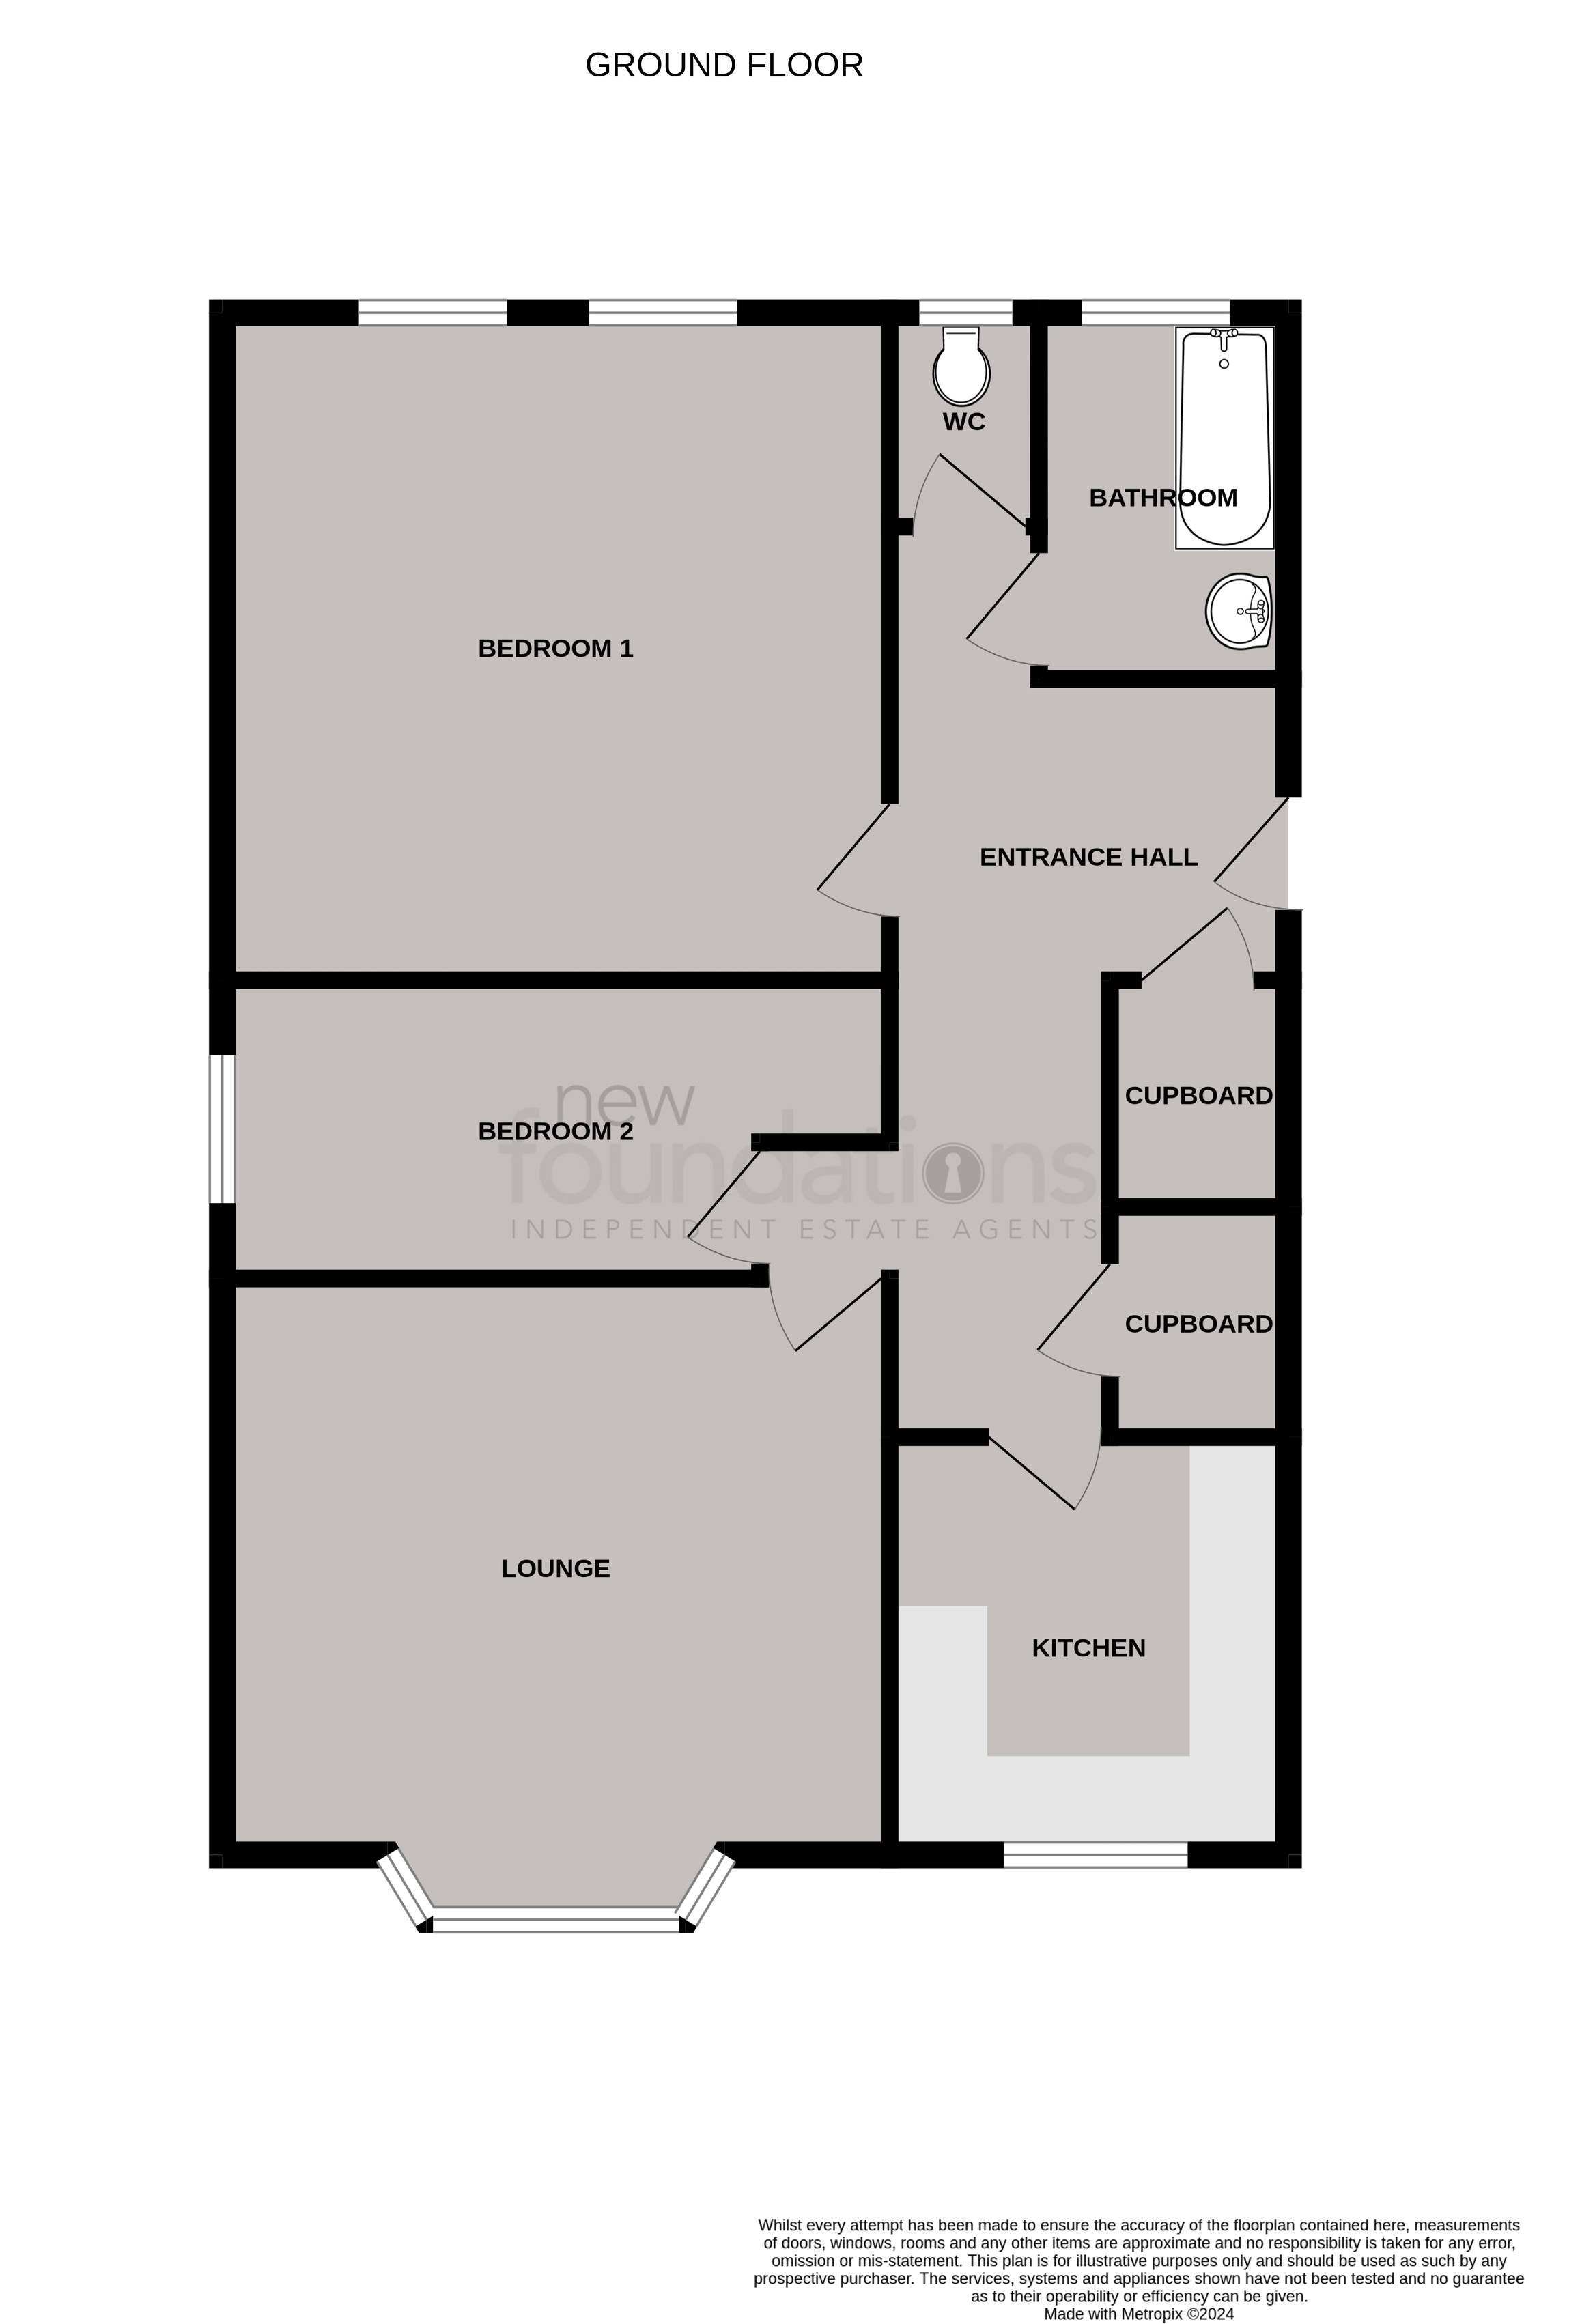 Floorplans For Eversley Road, Bexhill-on-Sea, East Sussex